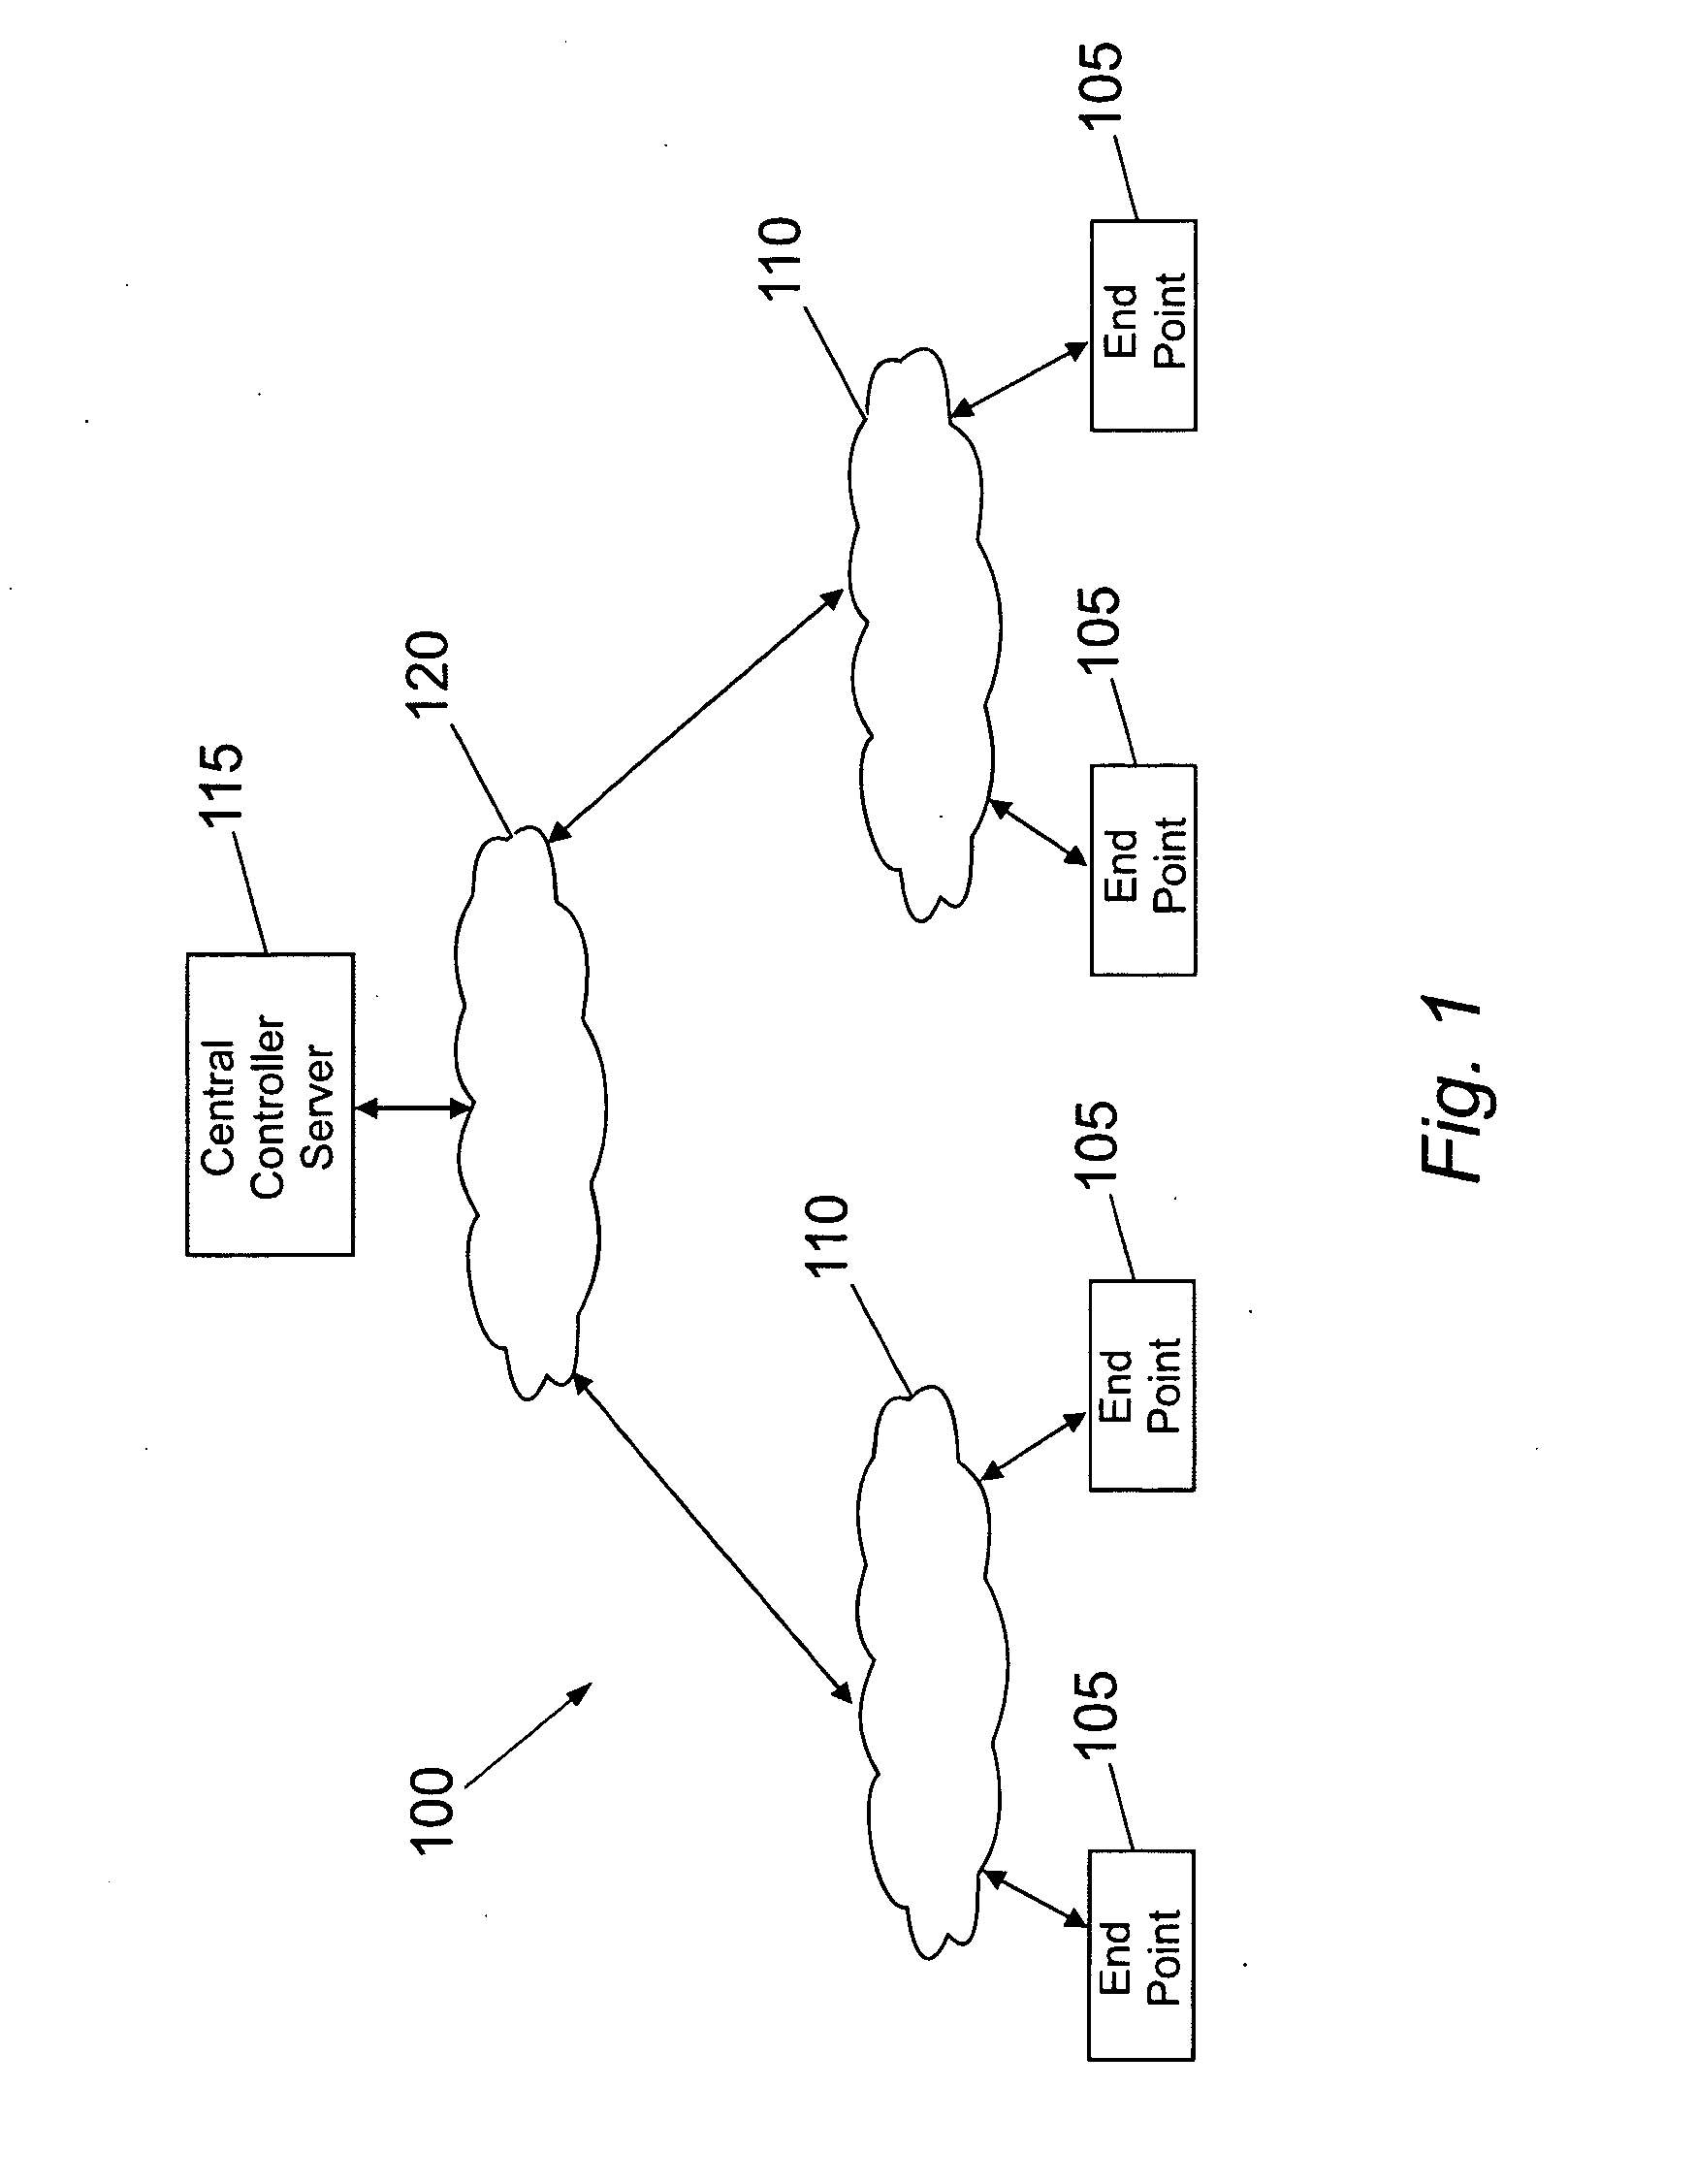 Method and System for Monitoring Road Surface Conditions